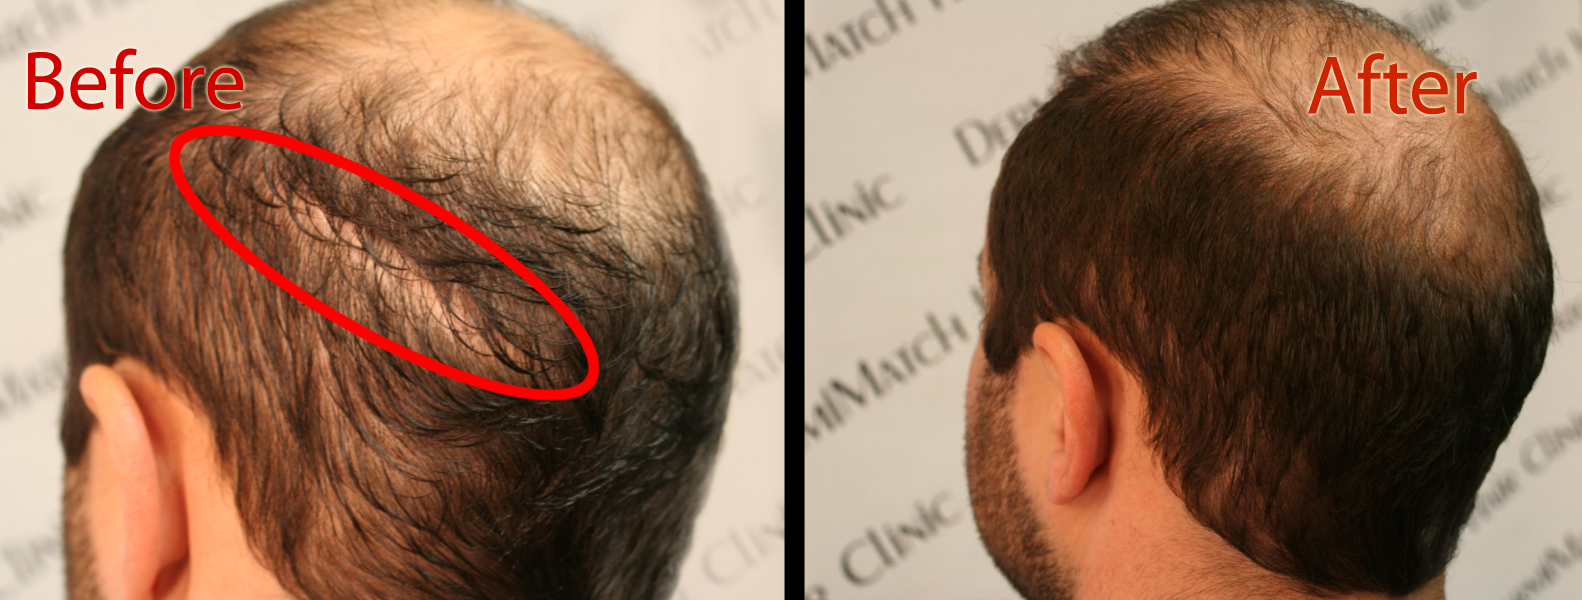 scalp micropigmentation smp for genetic hair loss